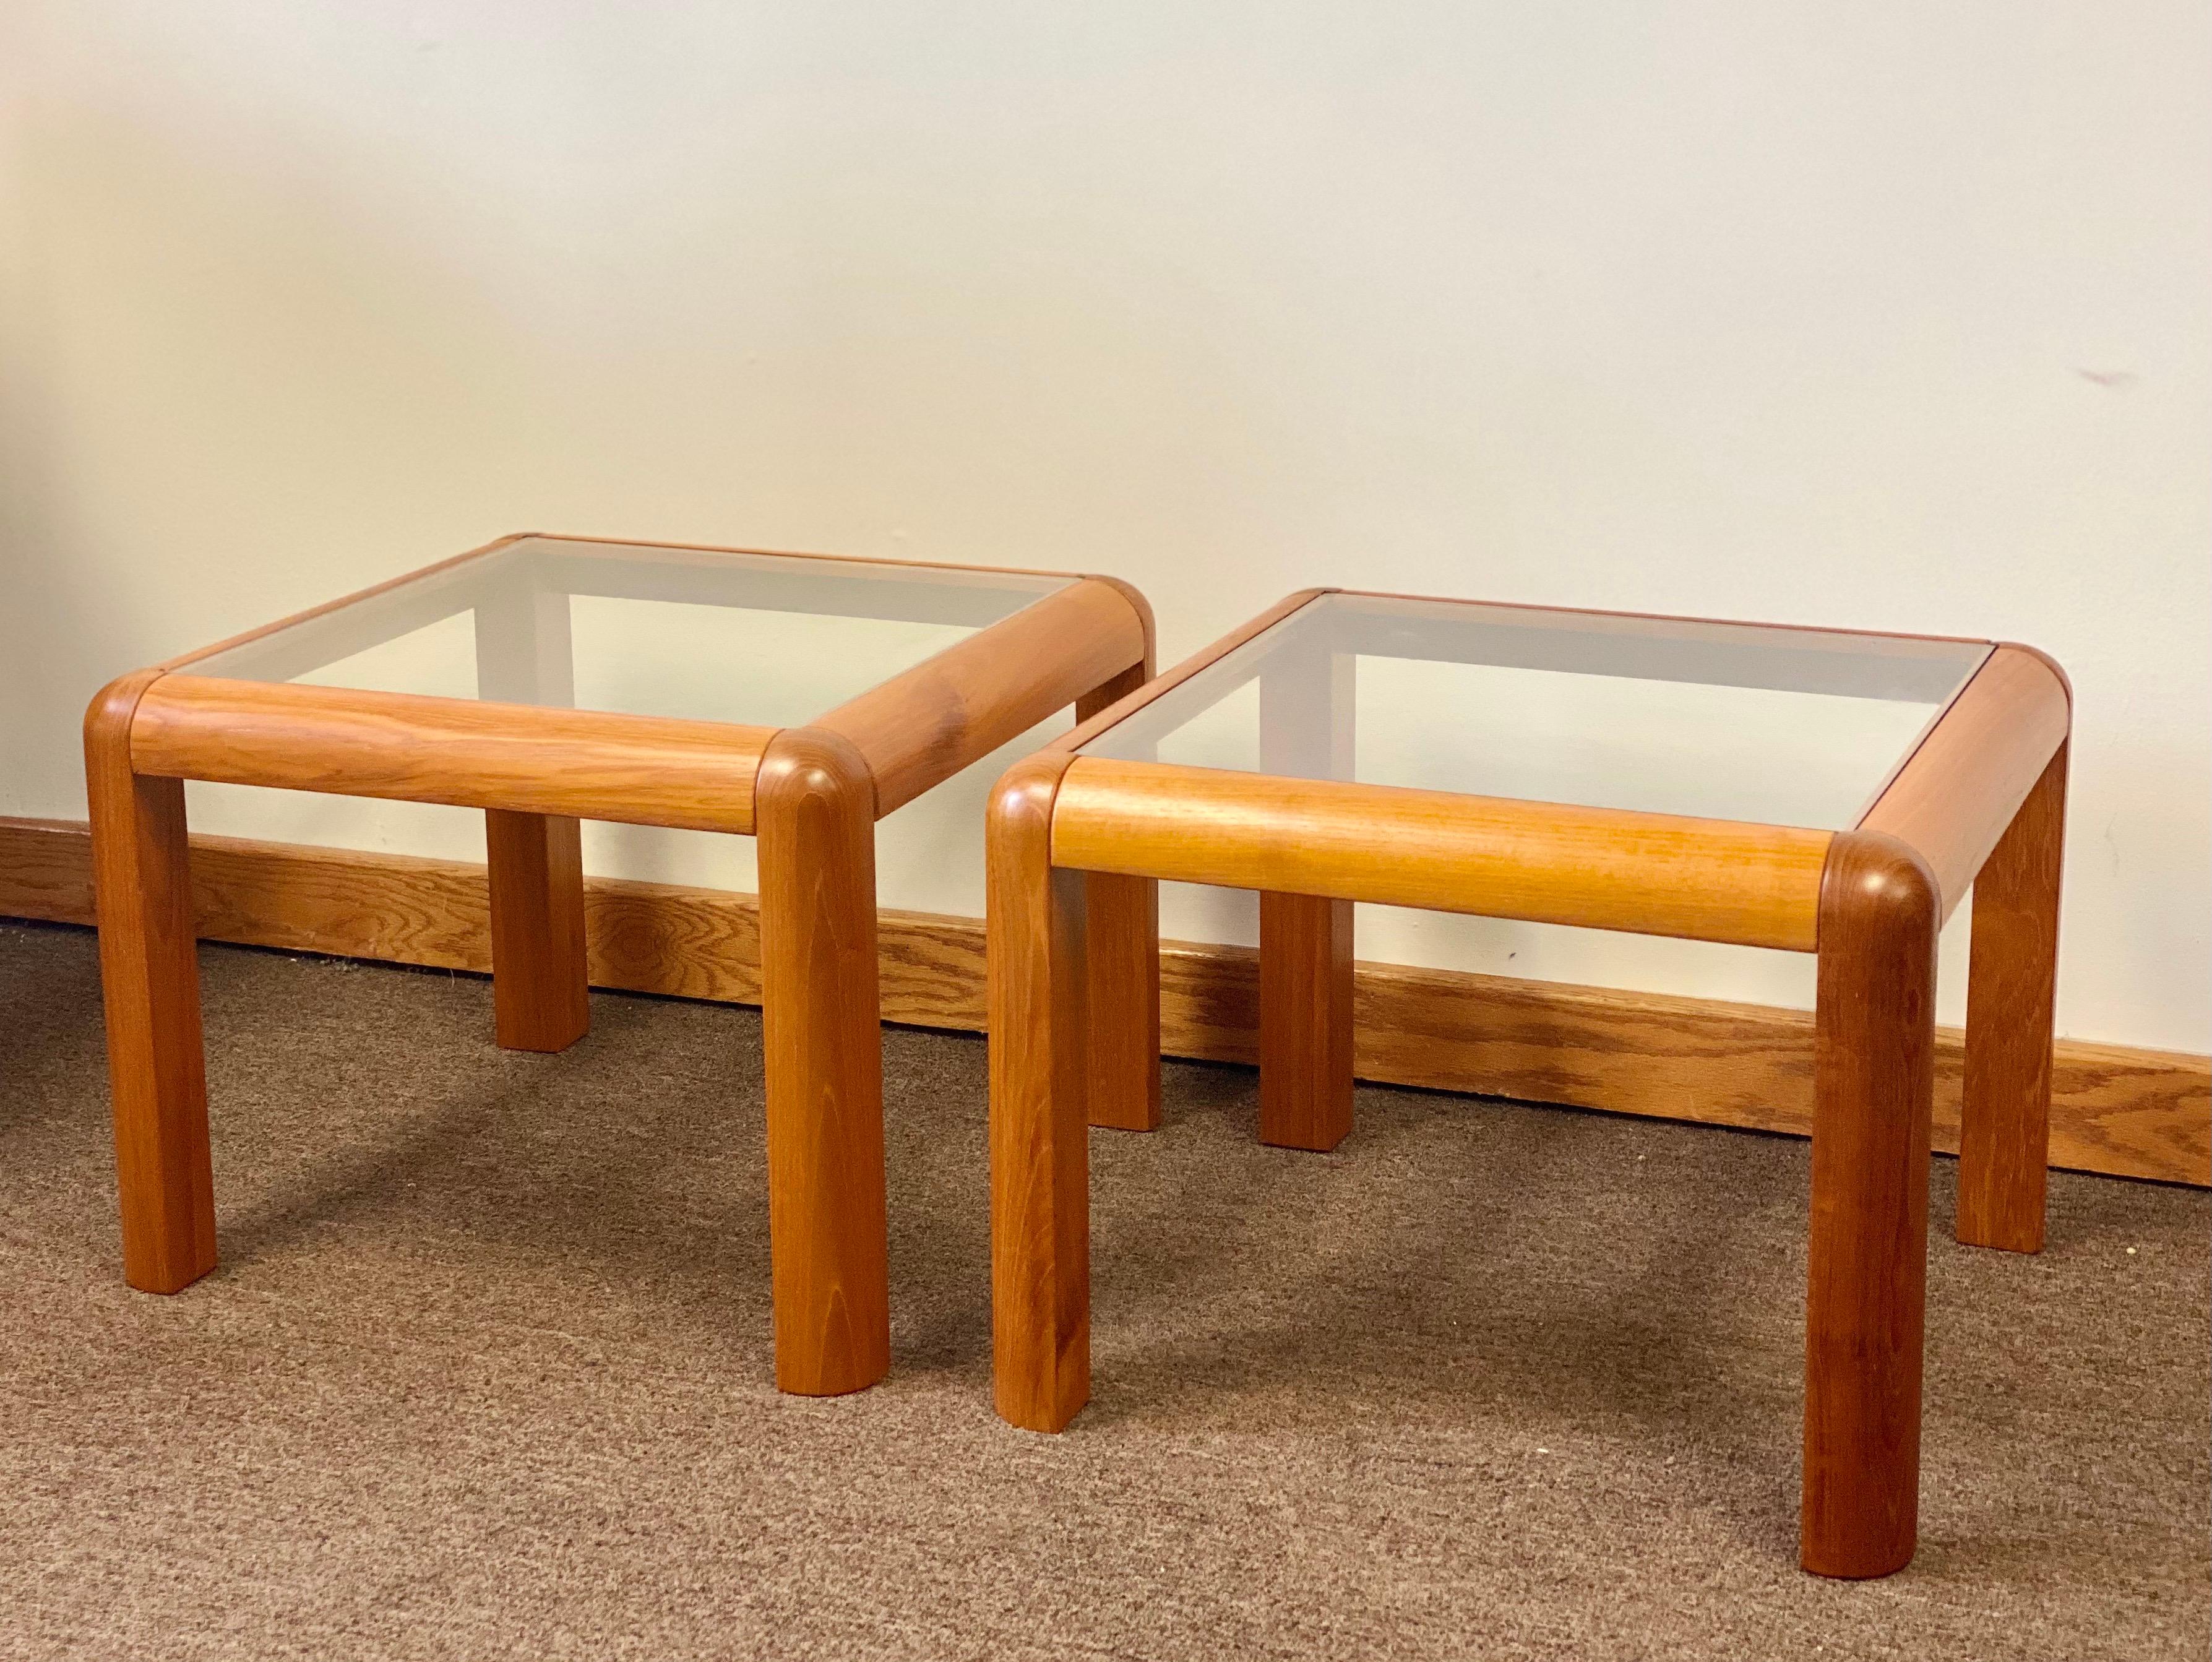 We are very pleased to offer a Mid-Century Modern pair of side tables by Trioh-Mobler, made in Denmark, circa the 1960s. Constructed from teak wood and clear inset glass tops, this strikingly modern pair will cause an impression with its uprights